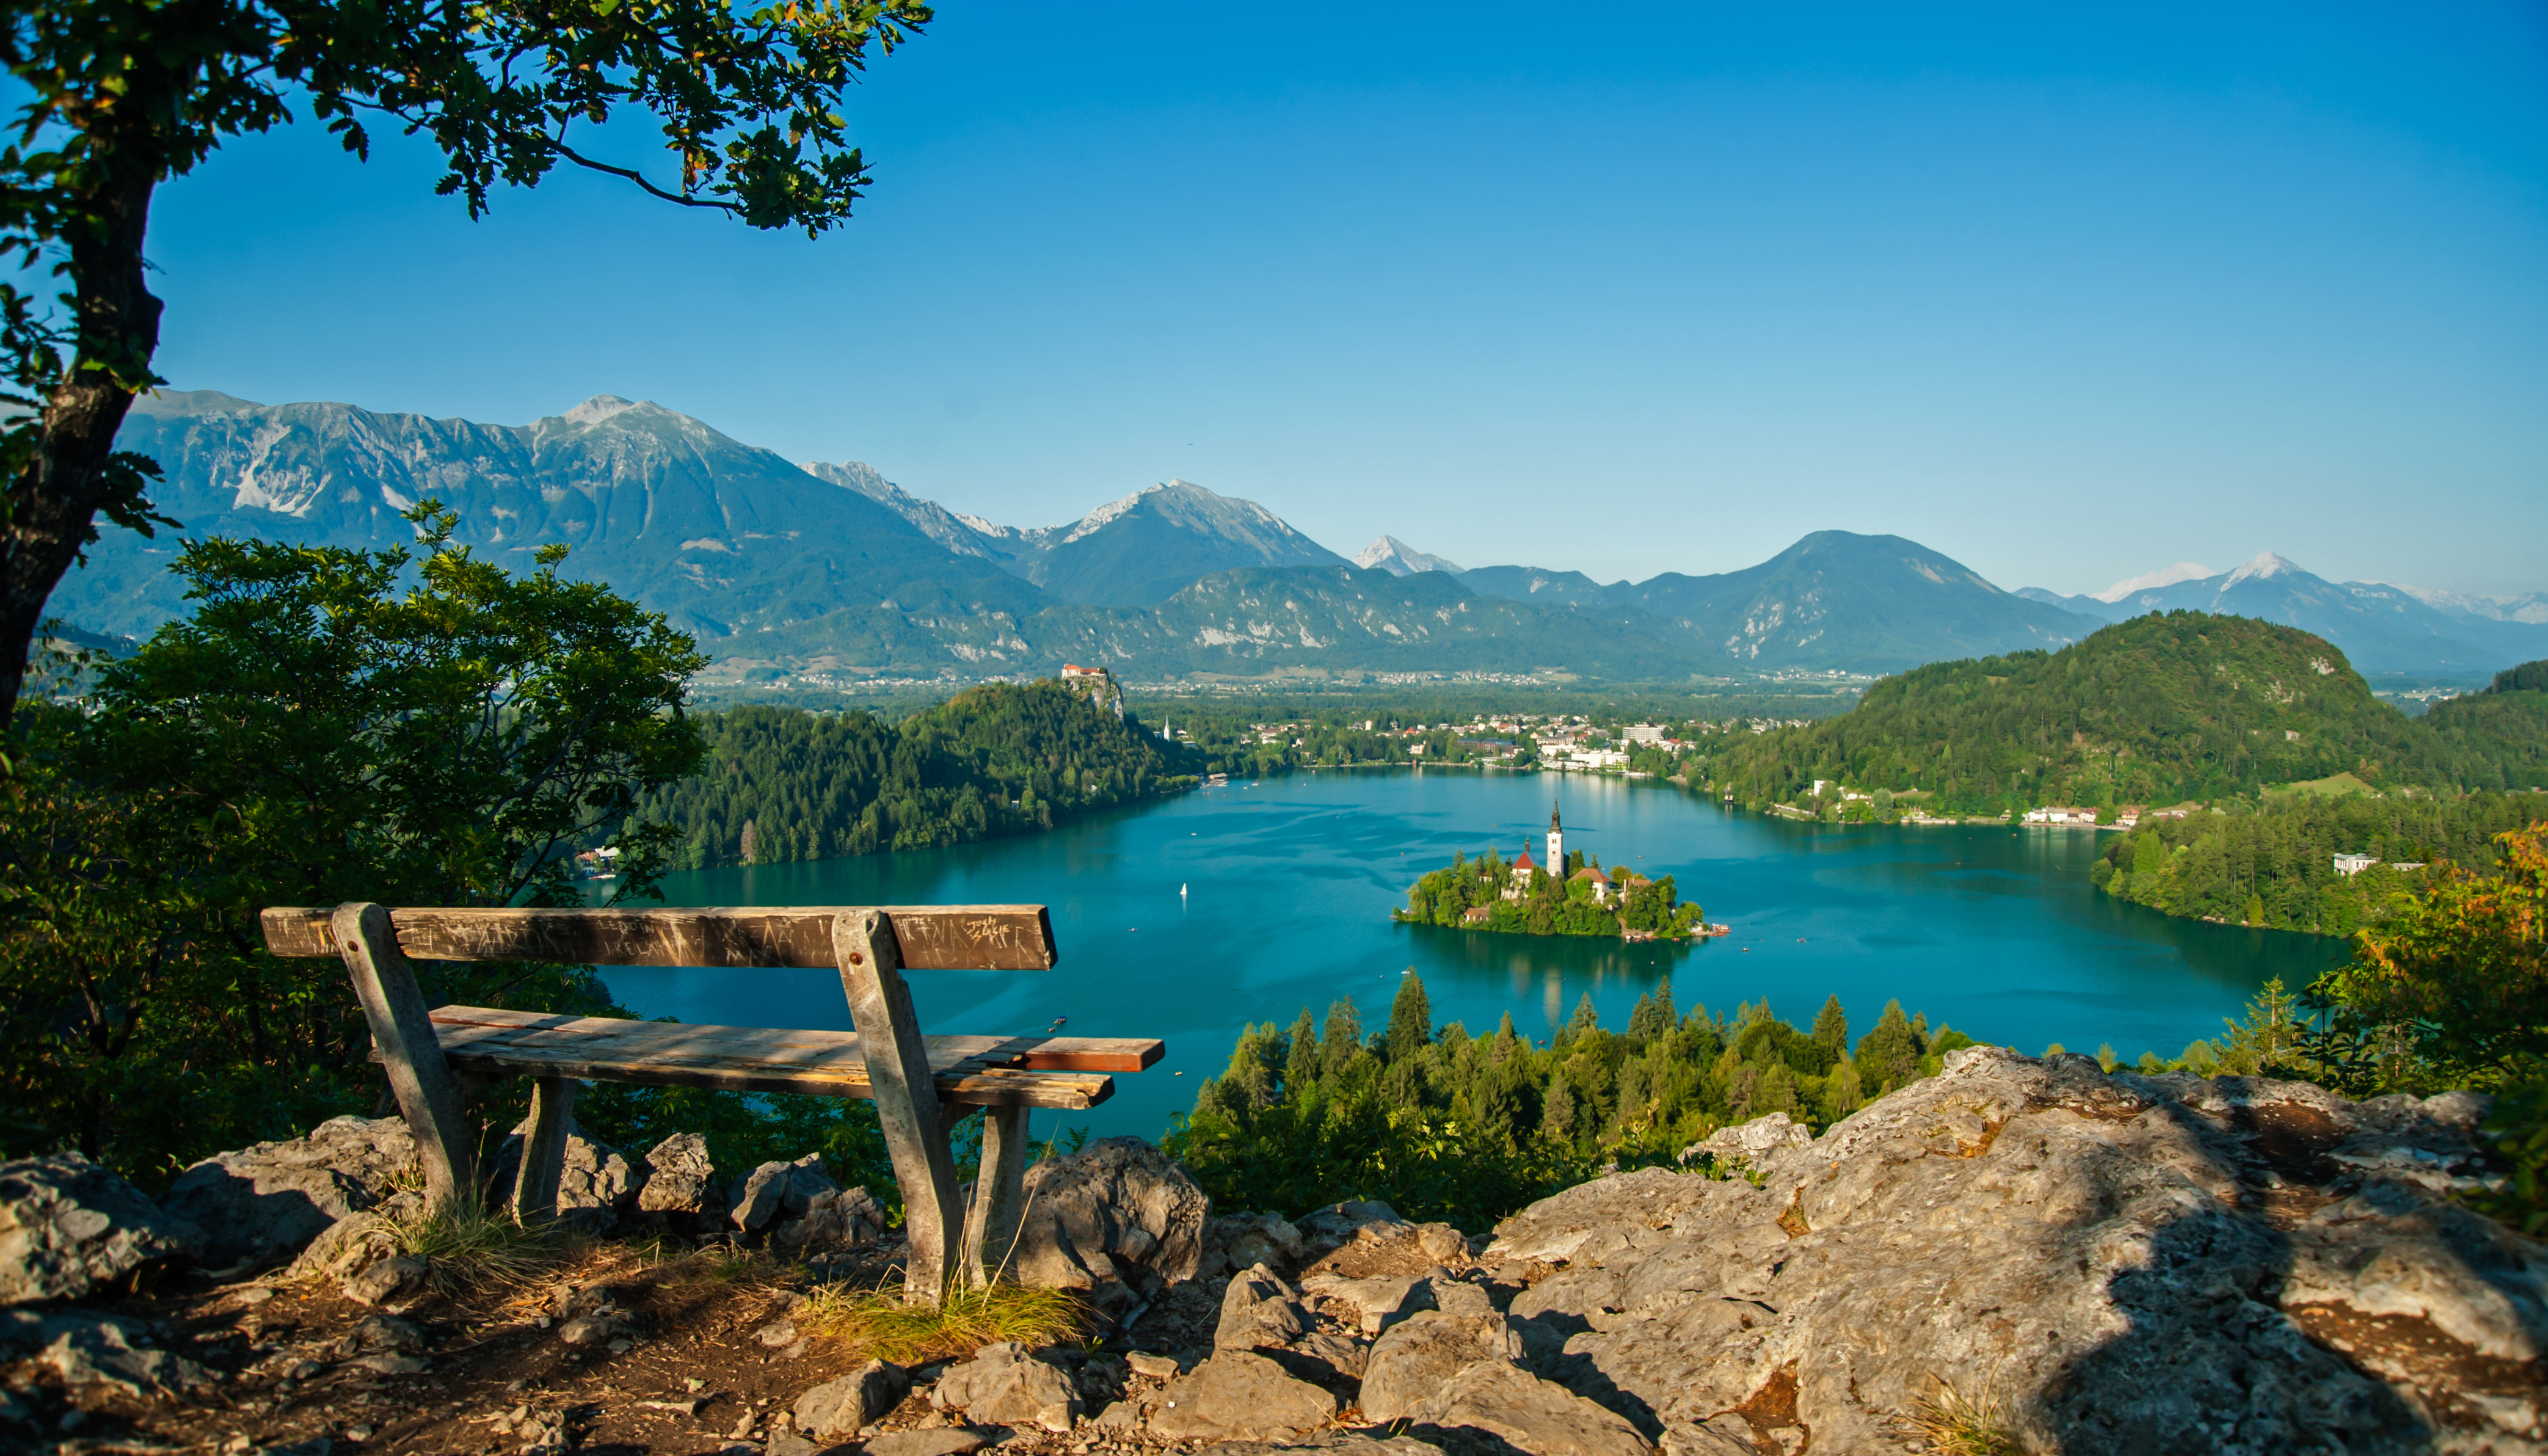 religious, assumption of mary church, bench, lake bled, lake, landscape, churches